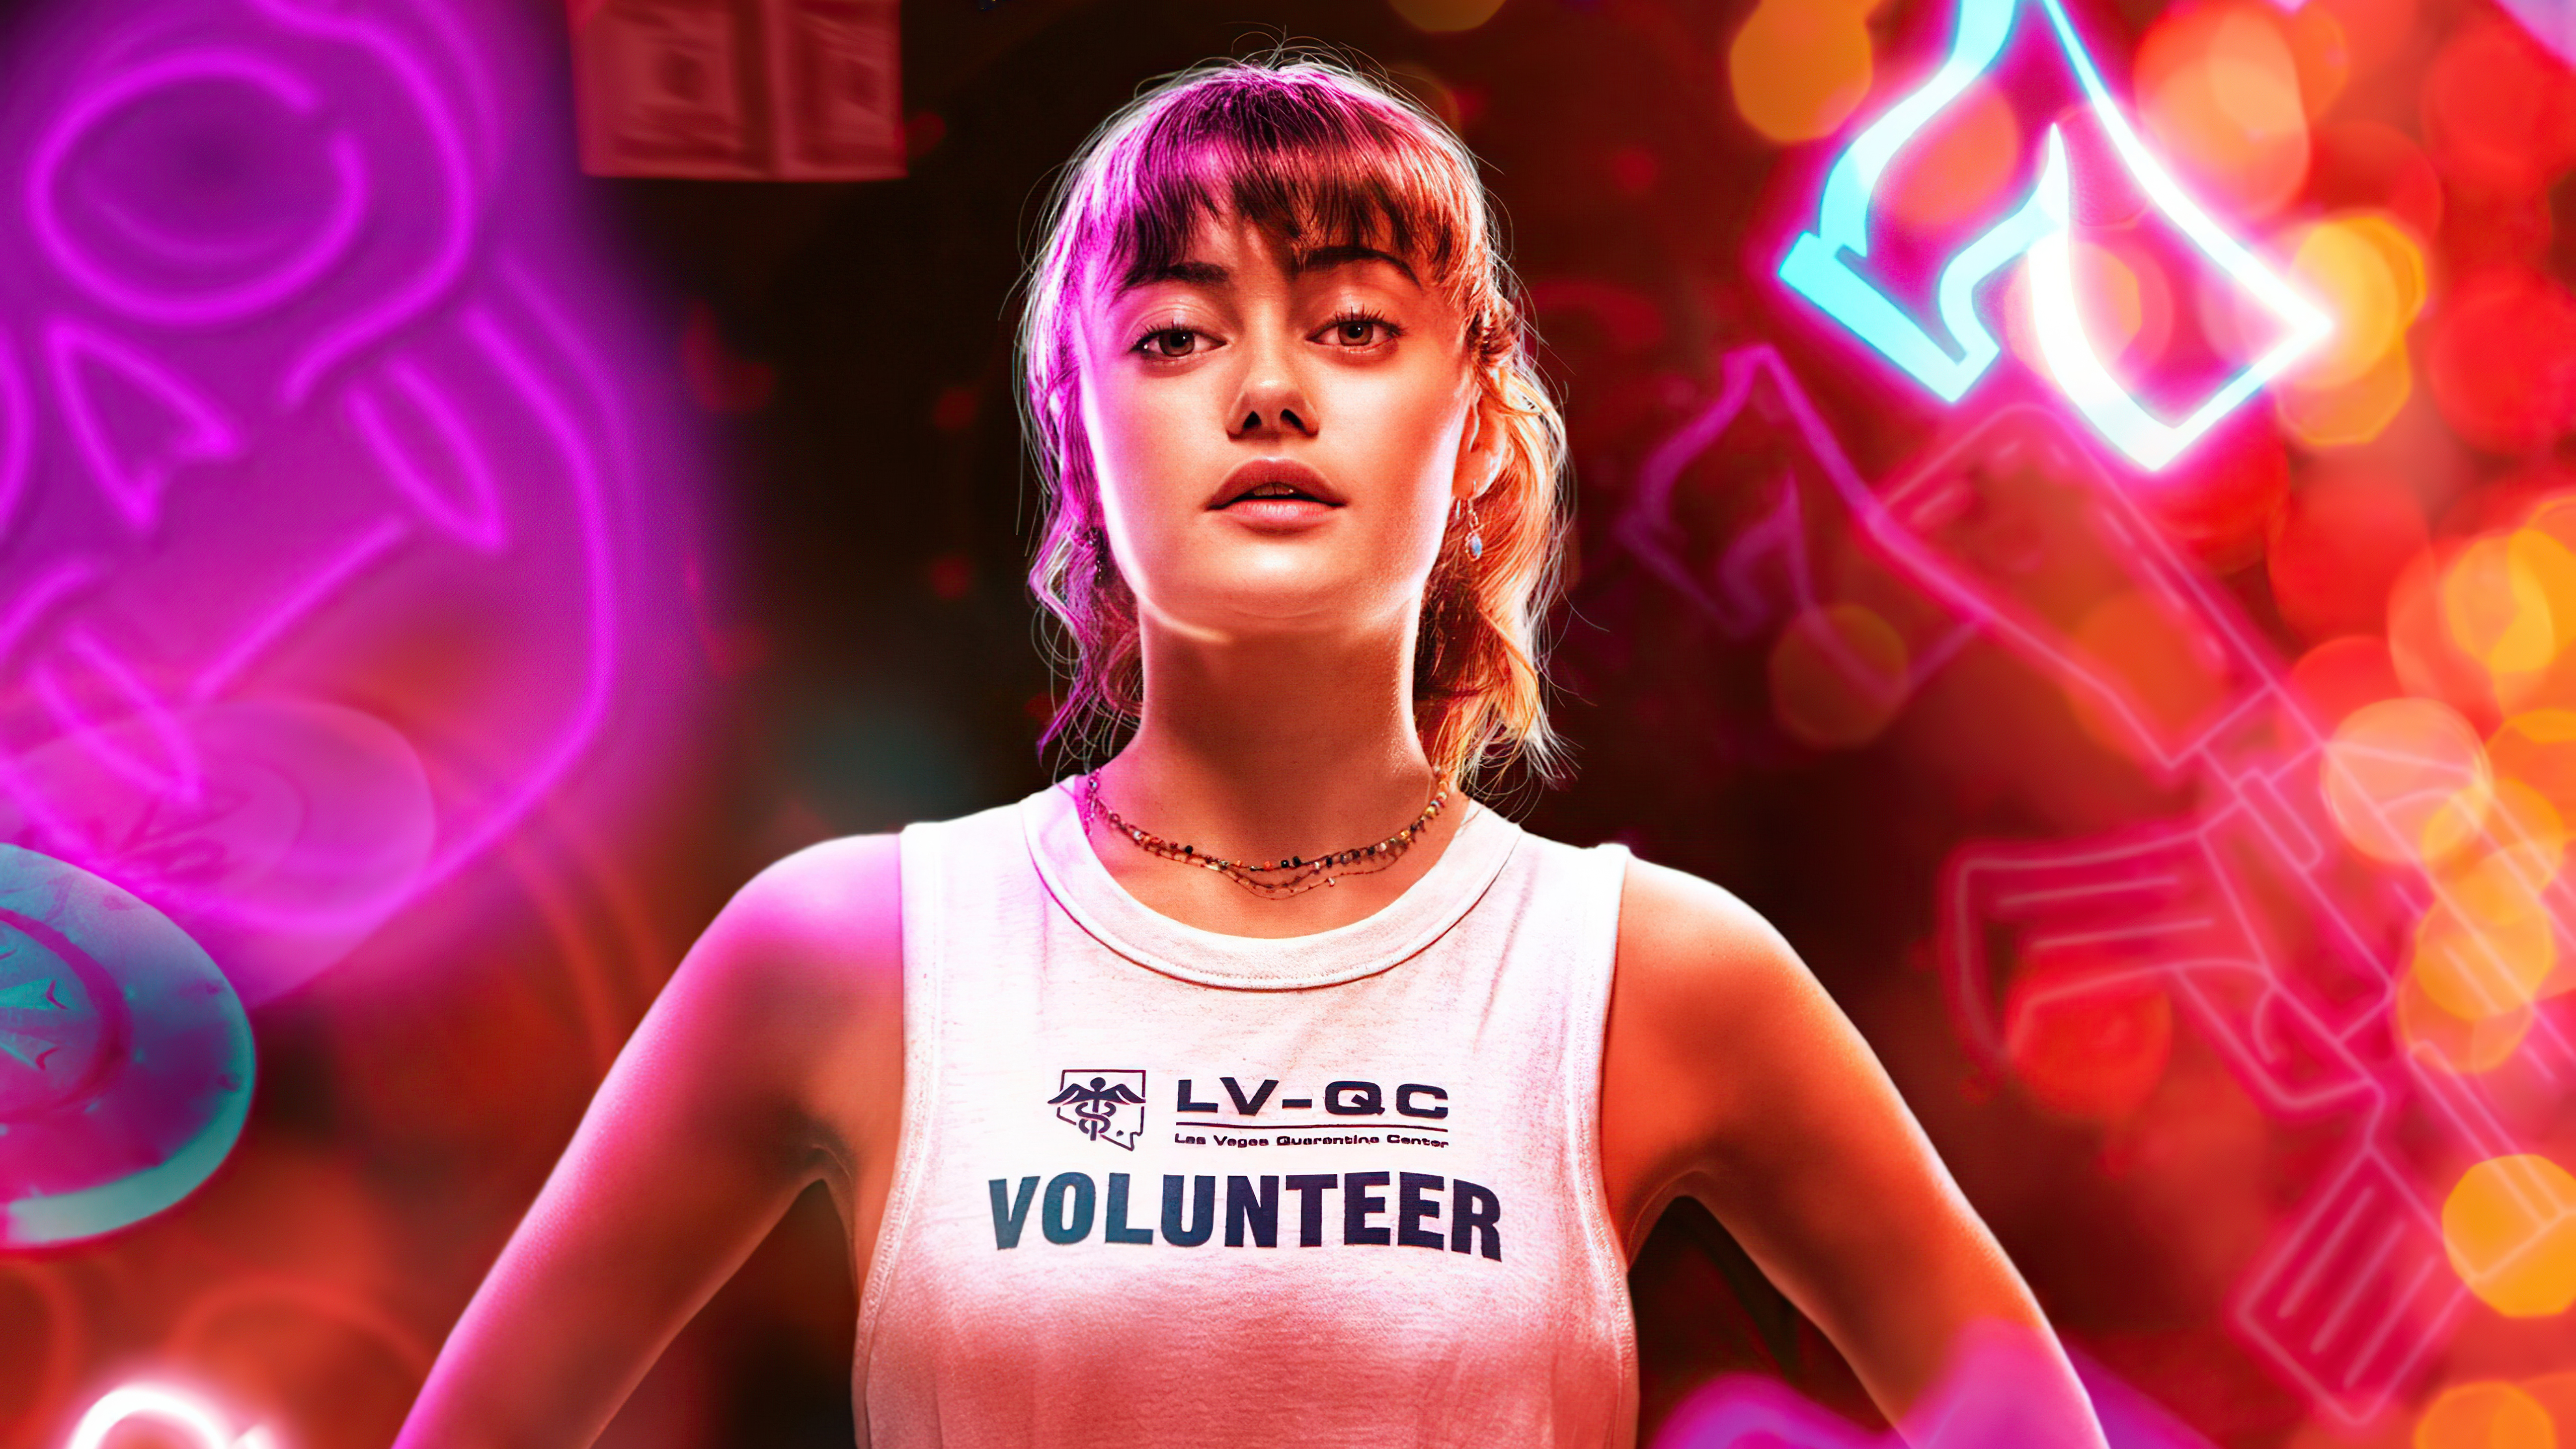 Ella Purnell as Kate Ward in 2021 movie Army of the Dead